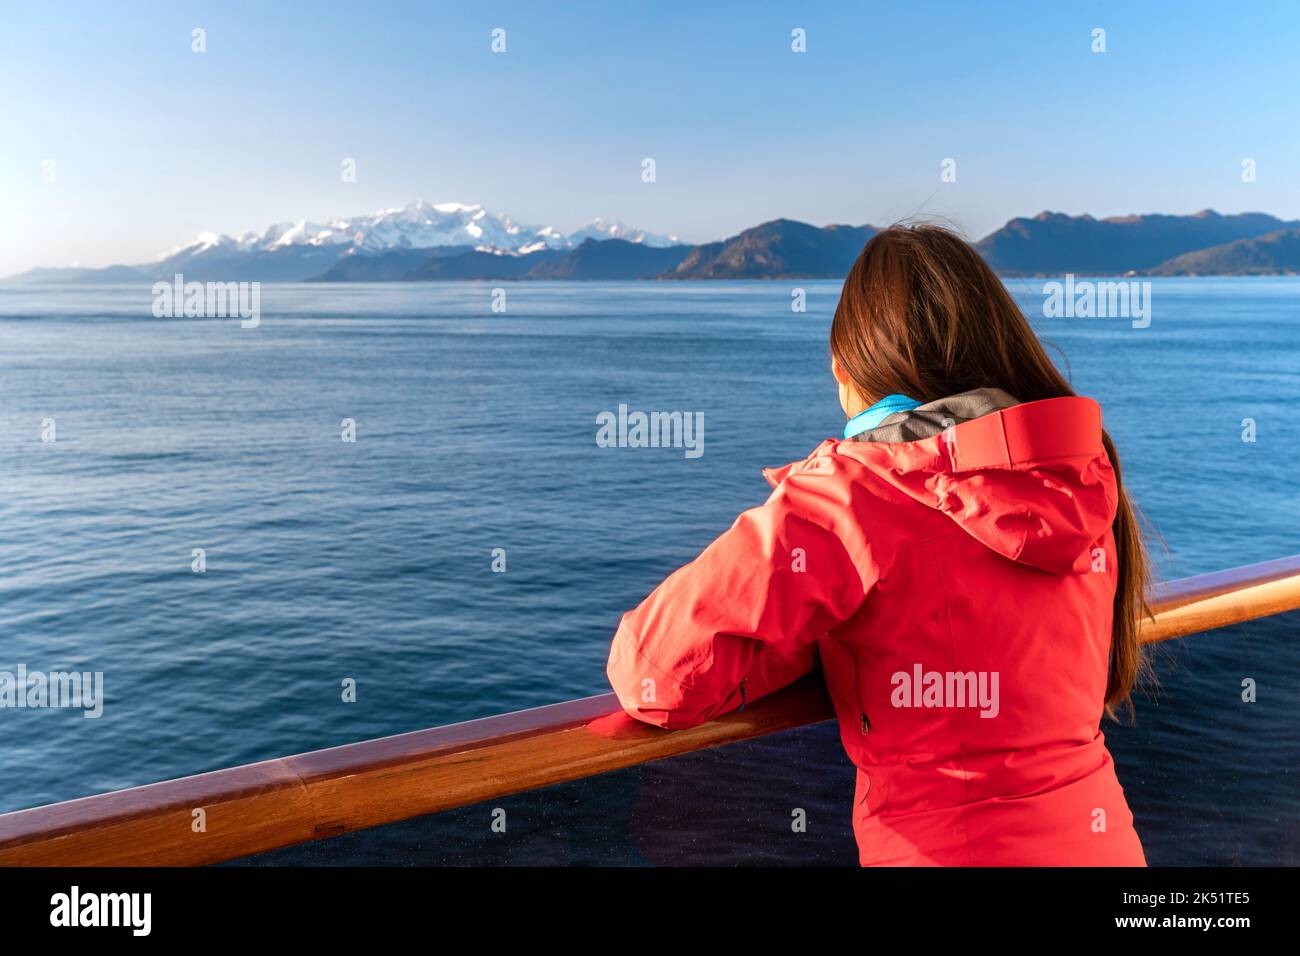 Alaska cruise travel tourist looking at mountains landscape from balcony deck of ship. Inside passage Glacier bay scenic vacation travel woman Stock Photo